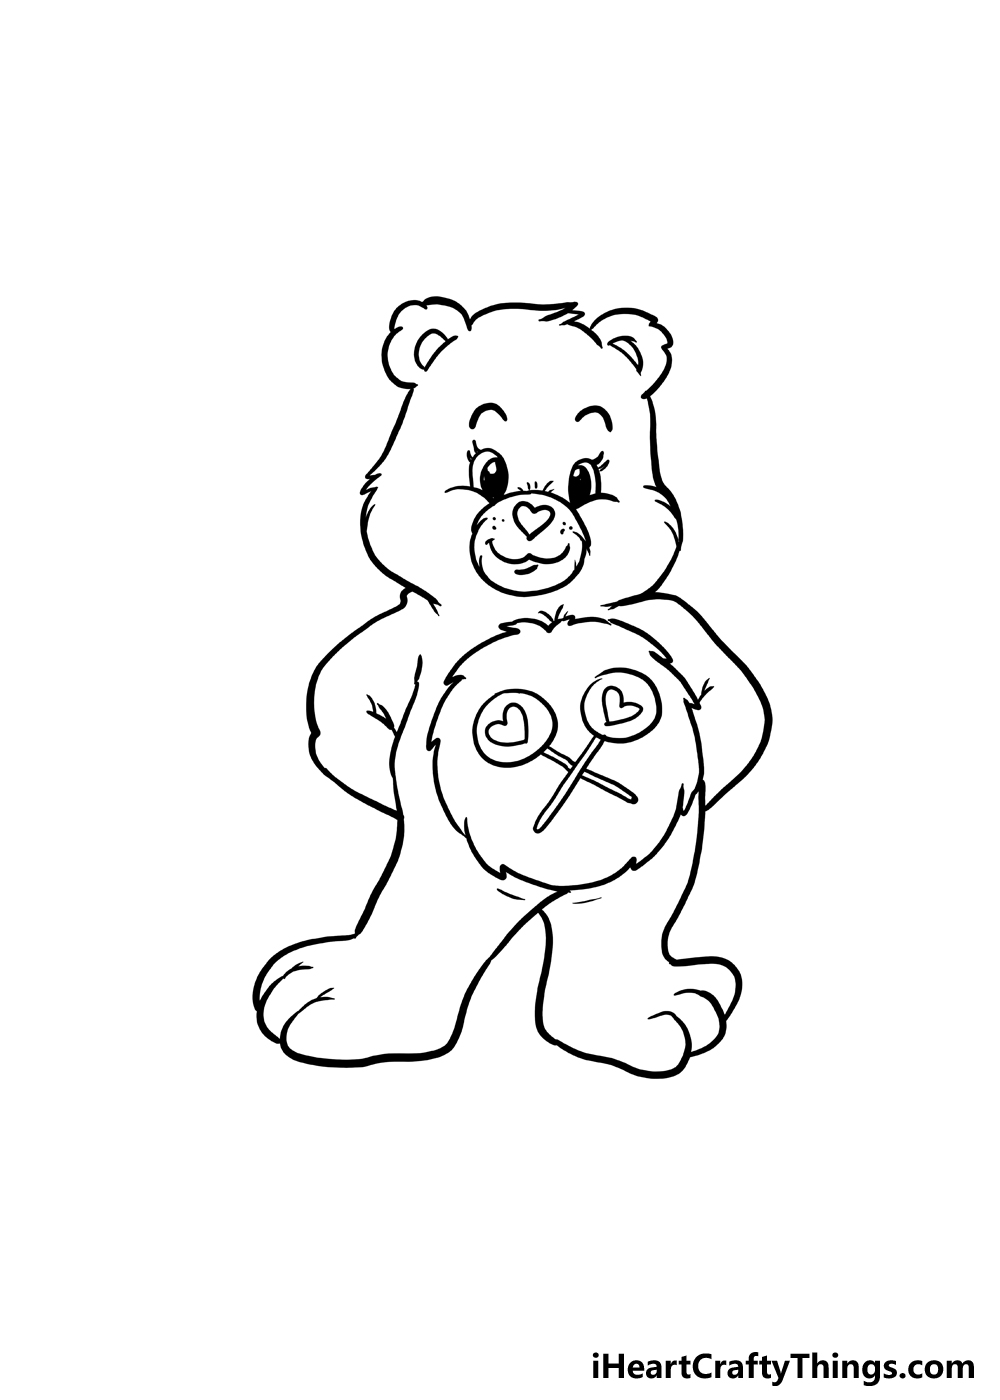 How to Draw A Care Bear step 5